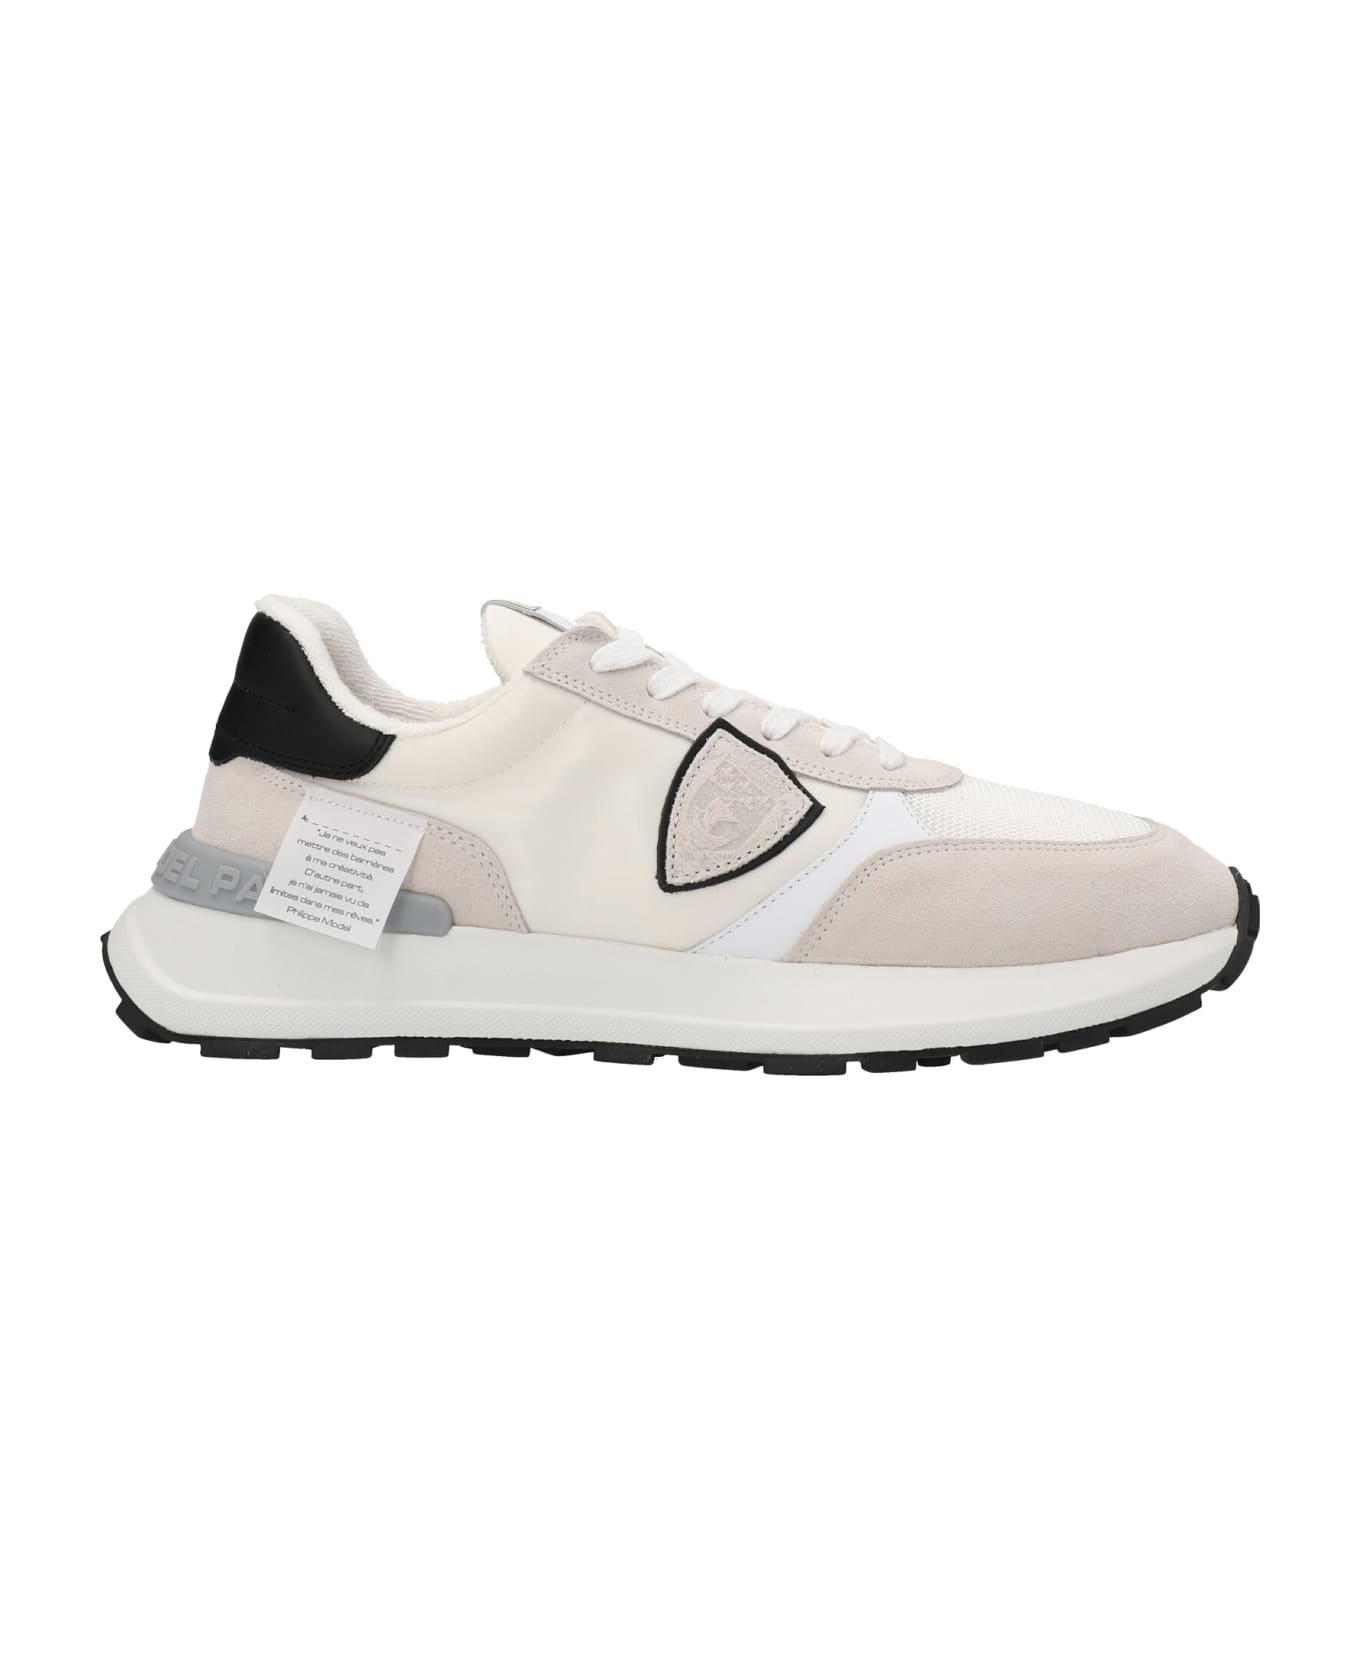 Philippe Model 'antibes Sneakers - White